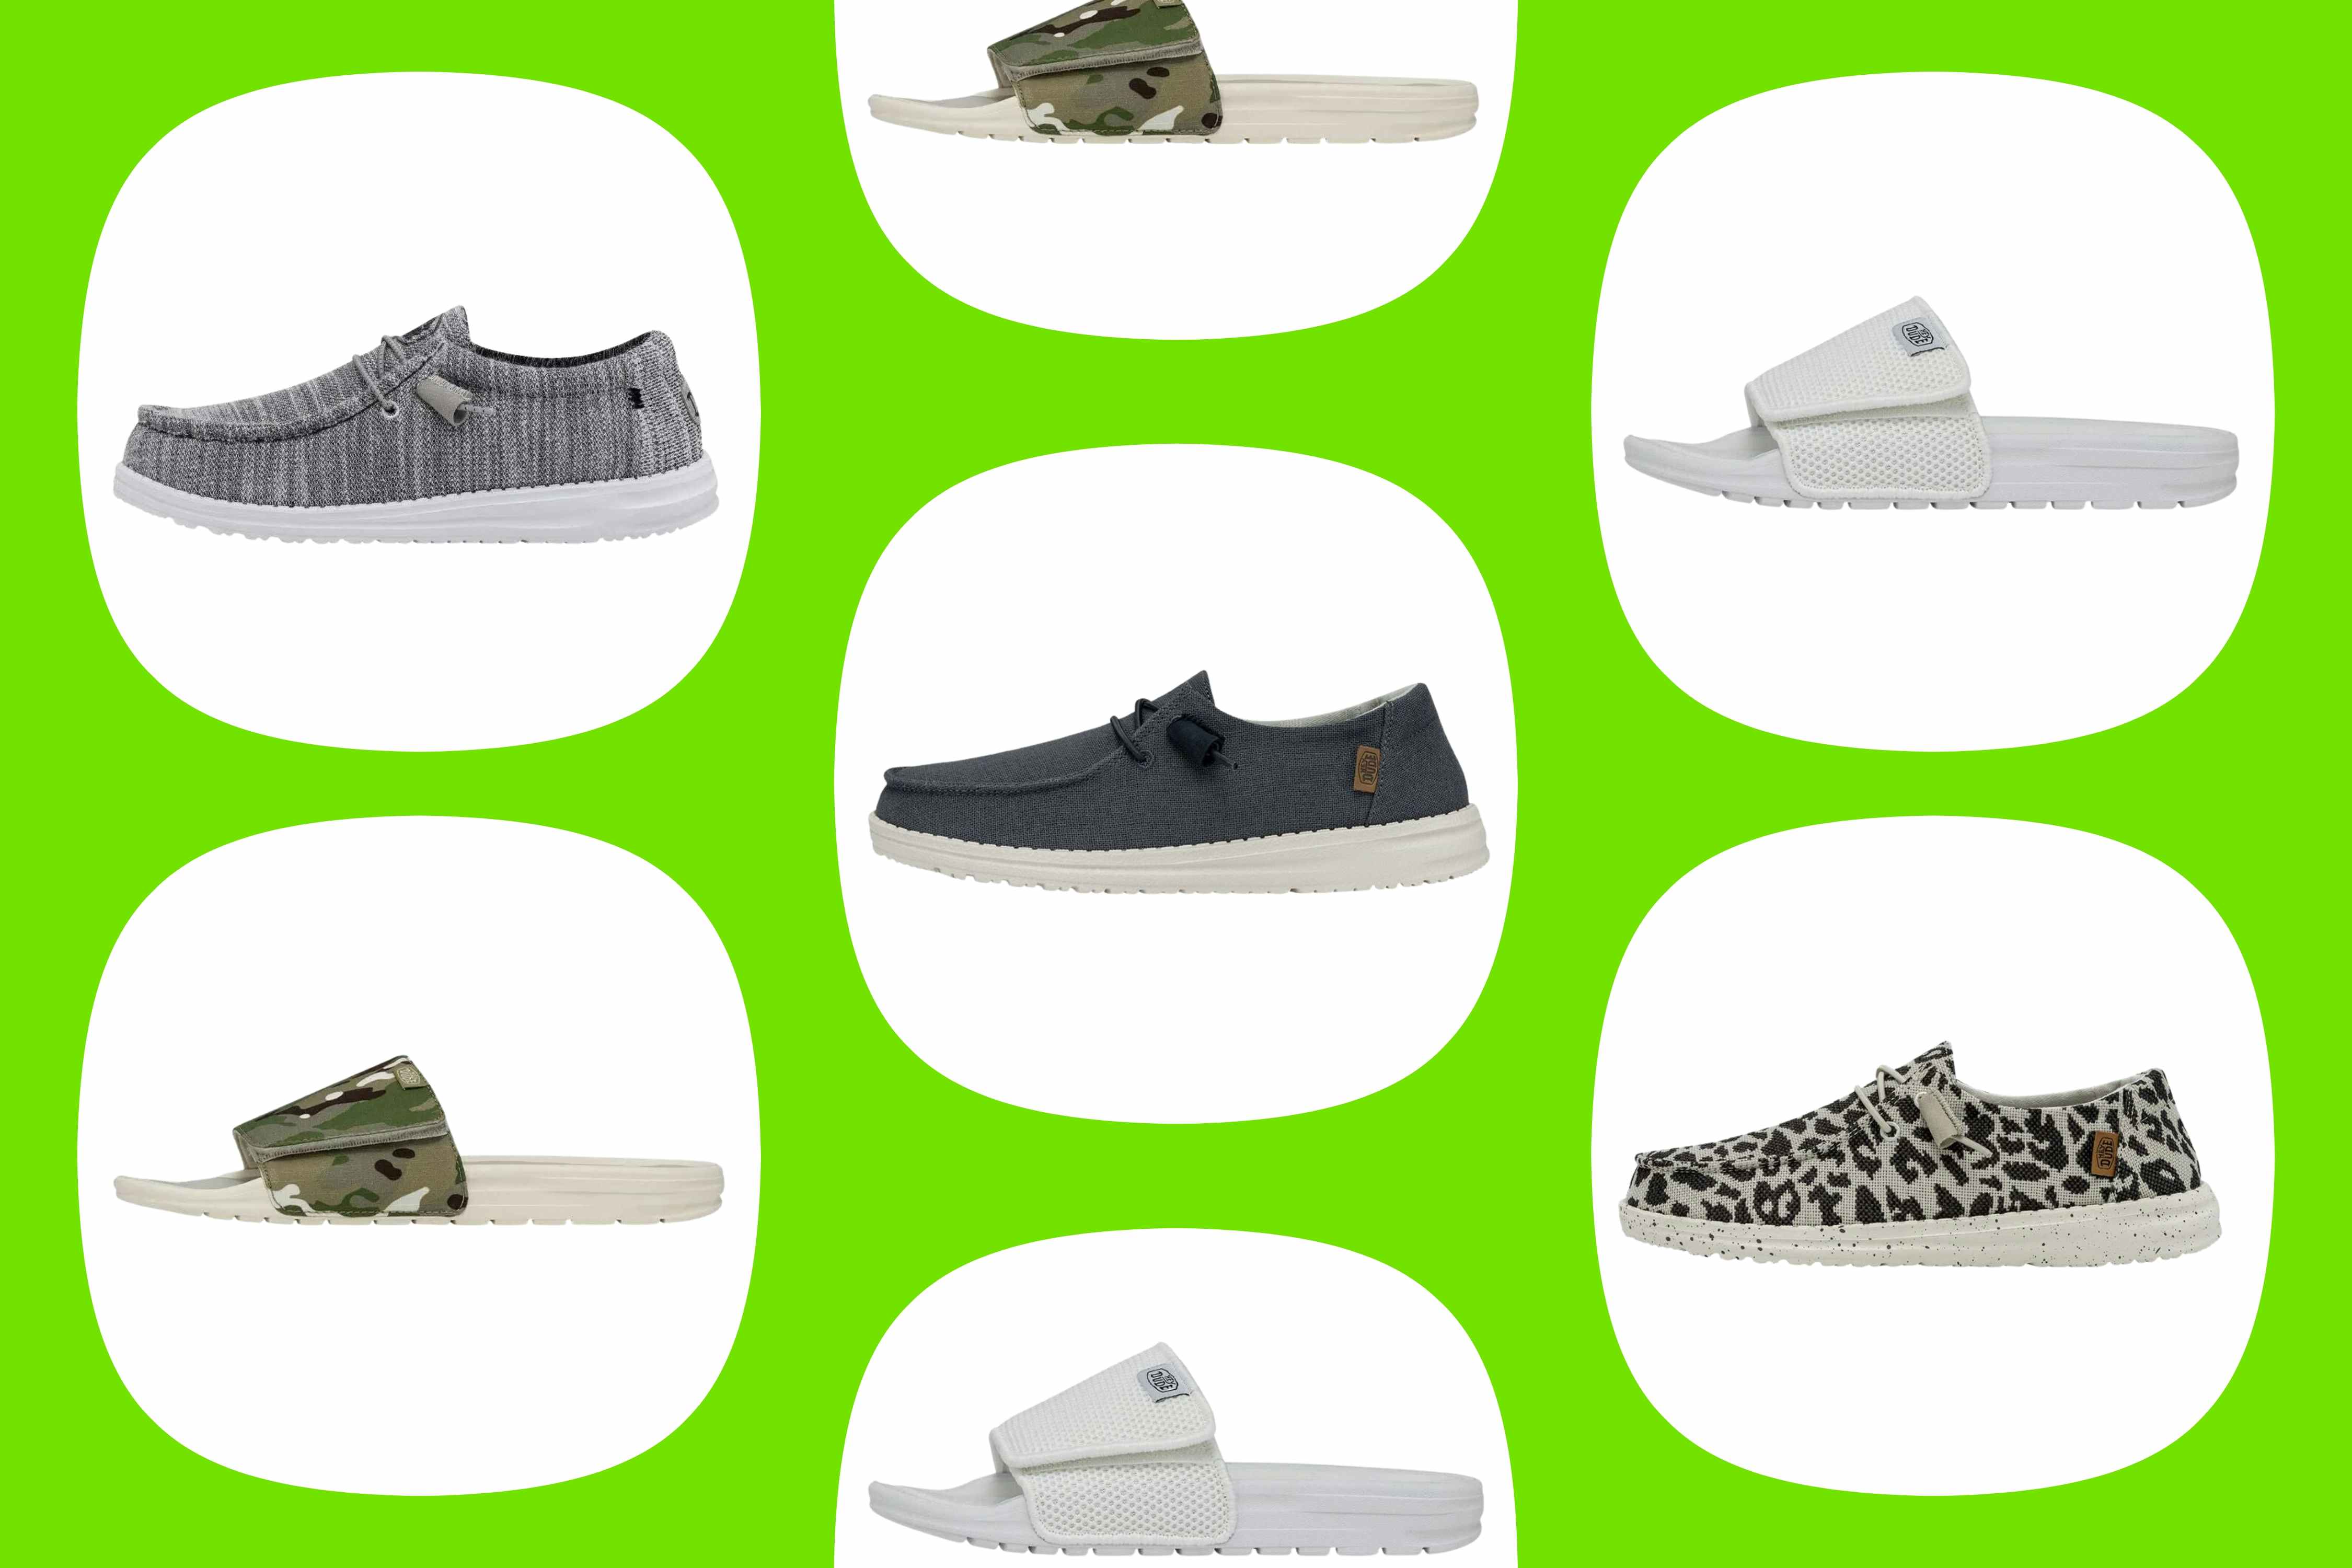 Hey Dude Shoe Sale at eBay: Prices Starting at Just $19 Shipped